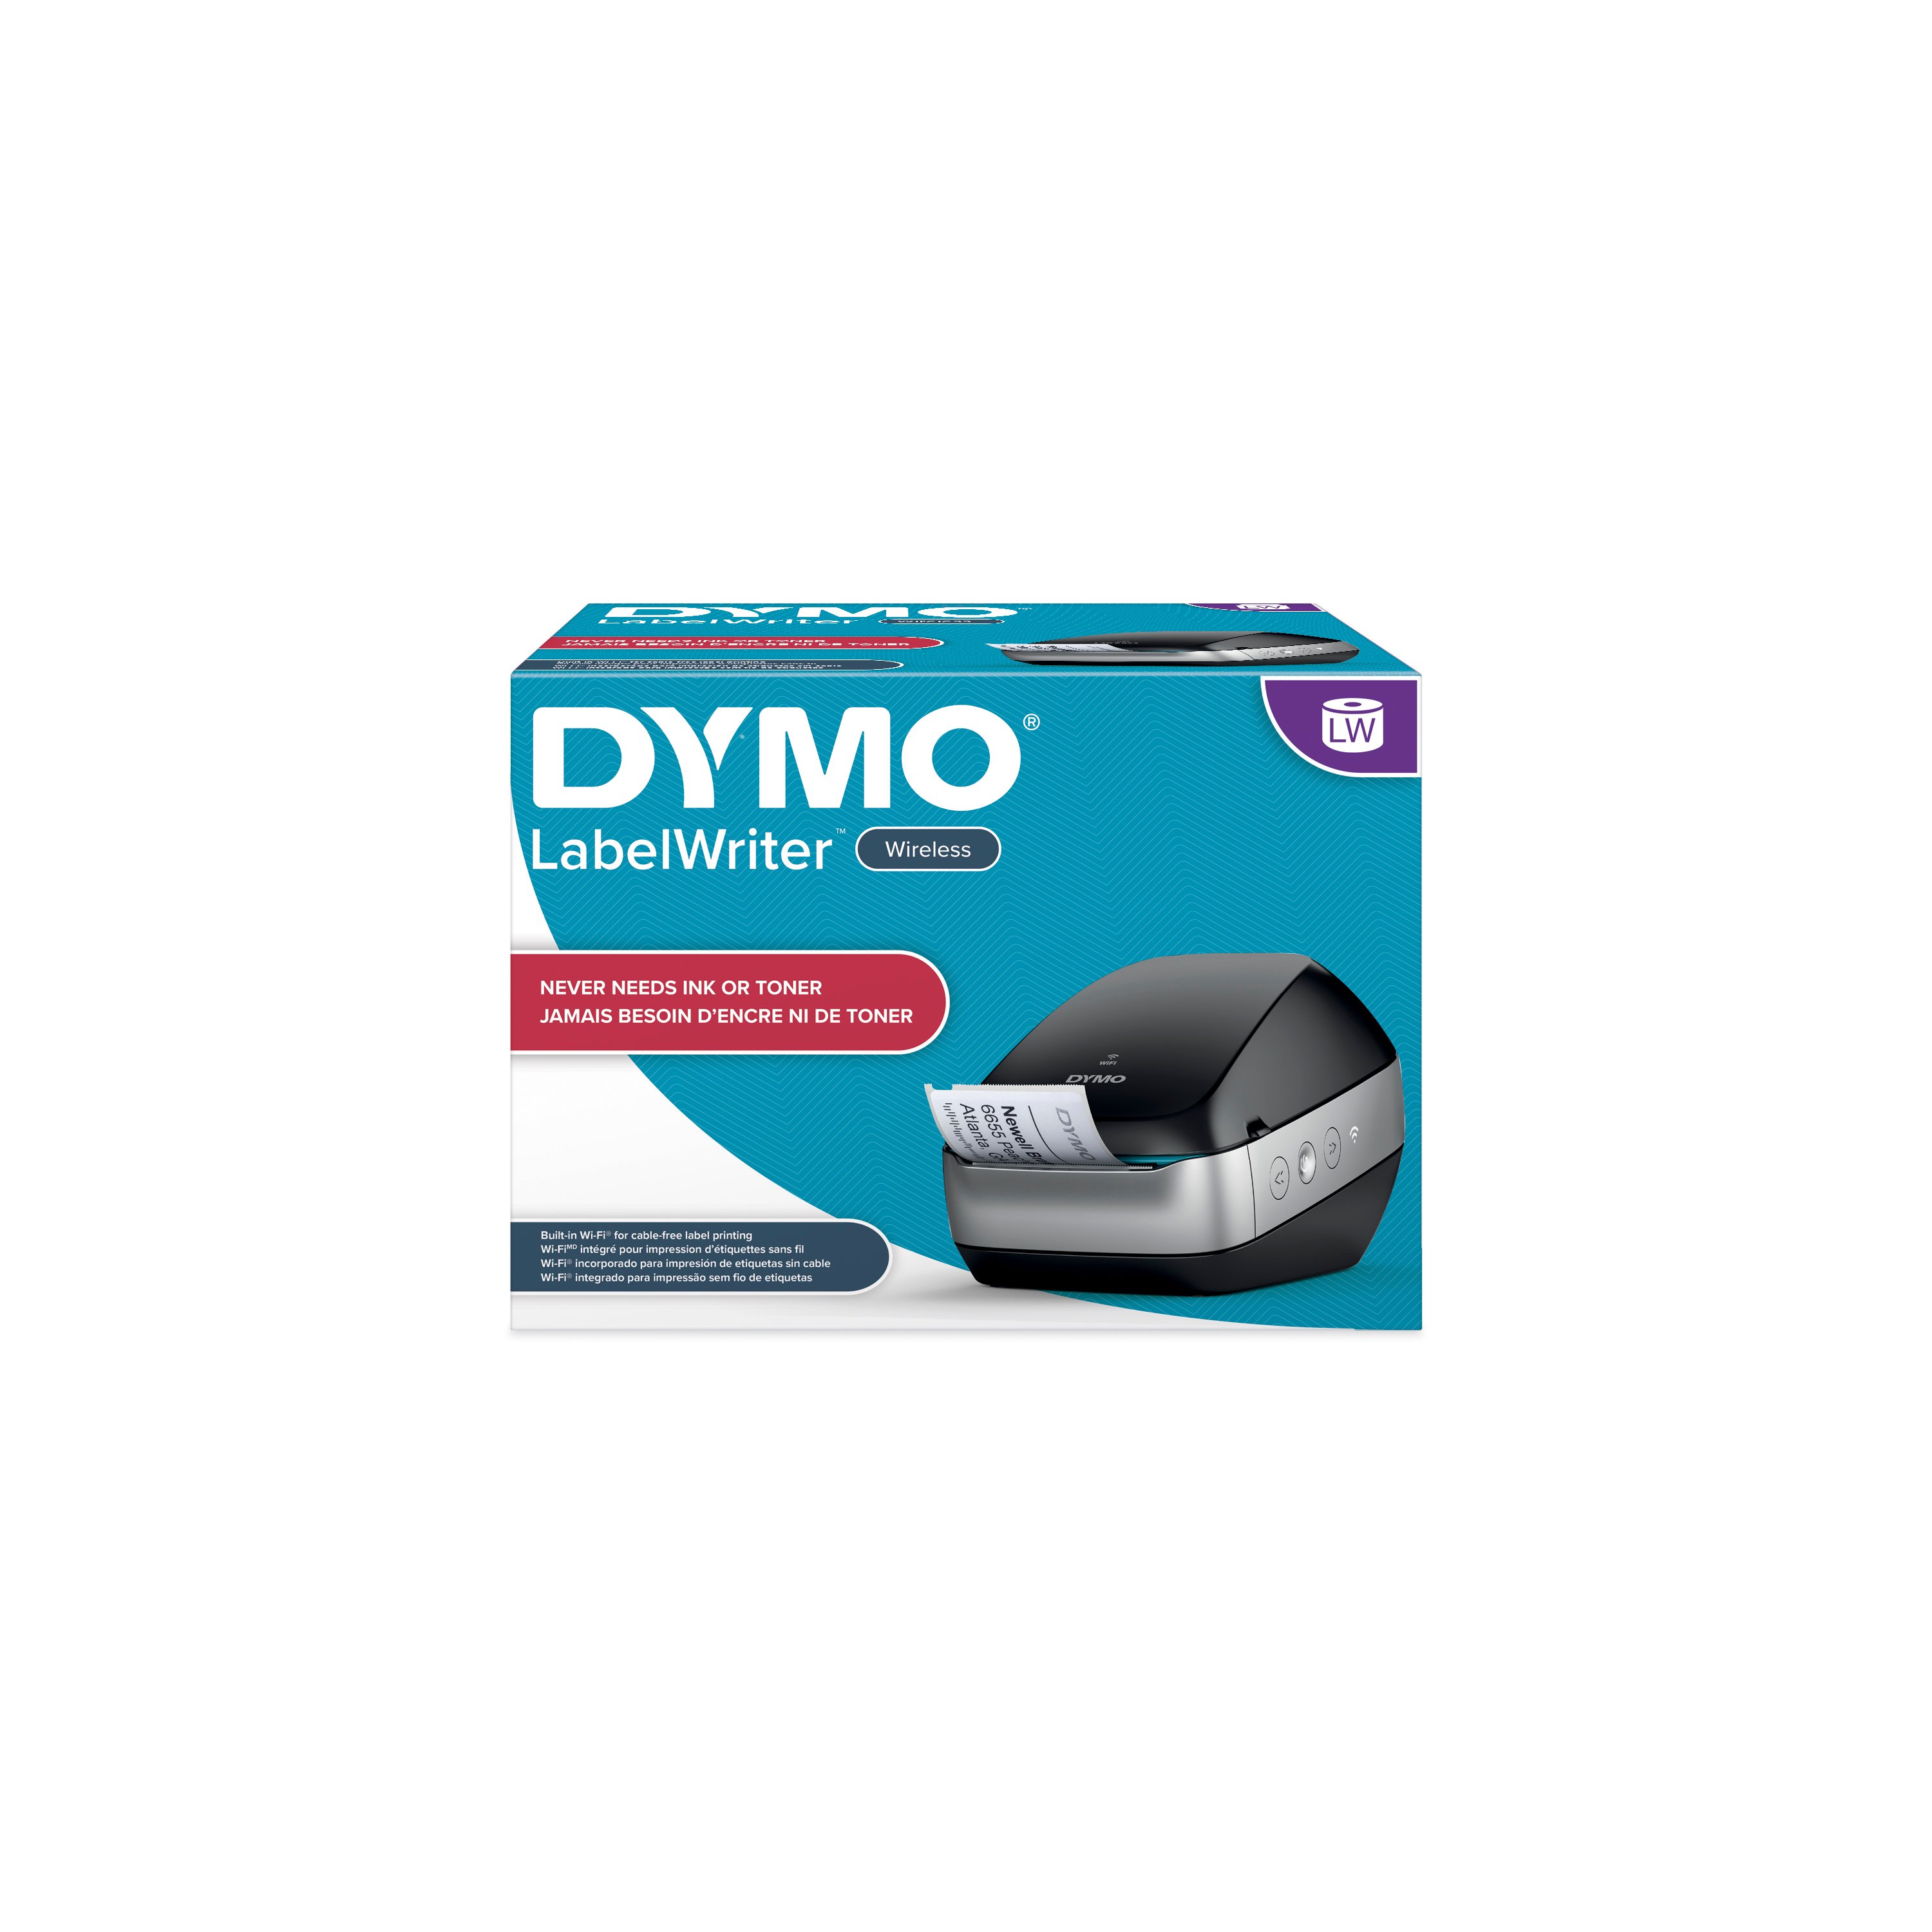 Android & iOS Wireless WiFi Adapter Kit for Dymo LabelWriter 4XL